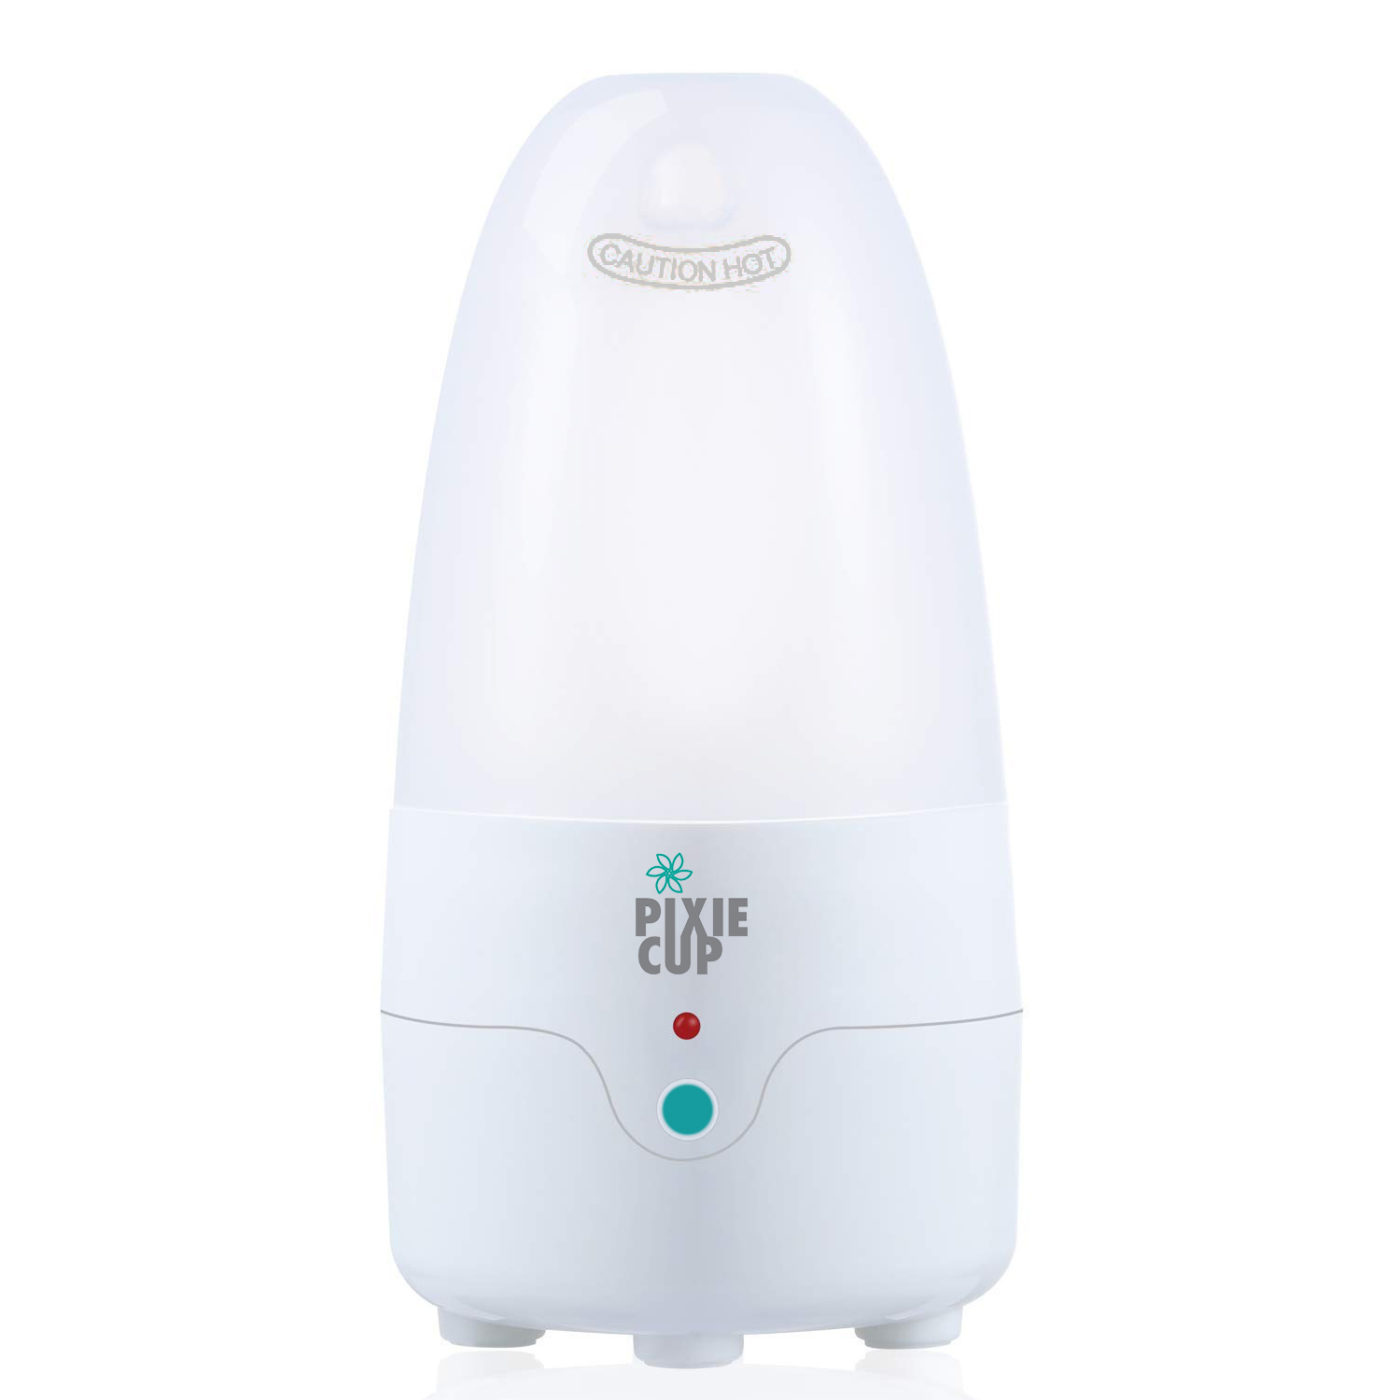 Pixie Steamer works at effectively cleaning menstrual cups